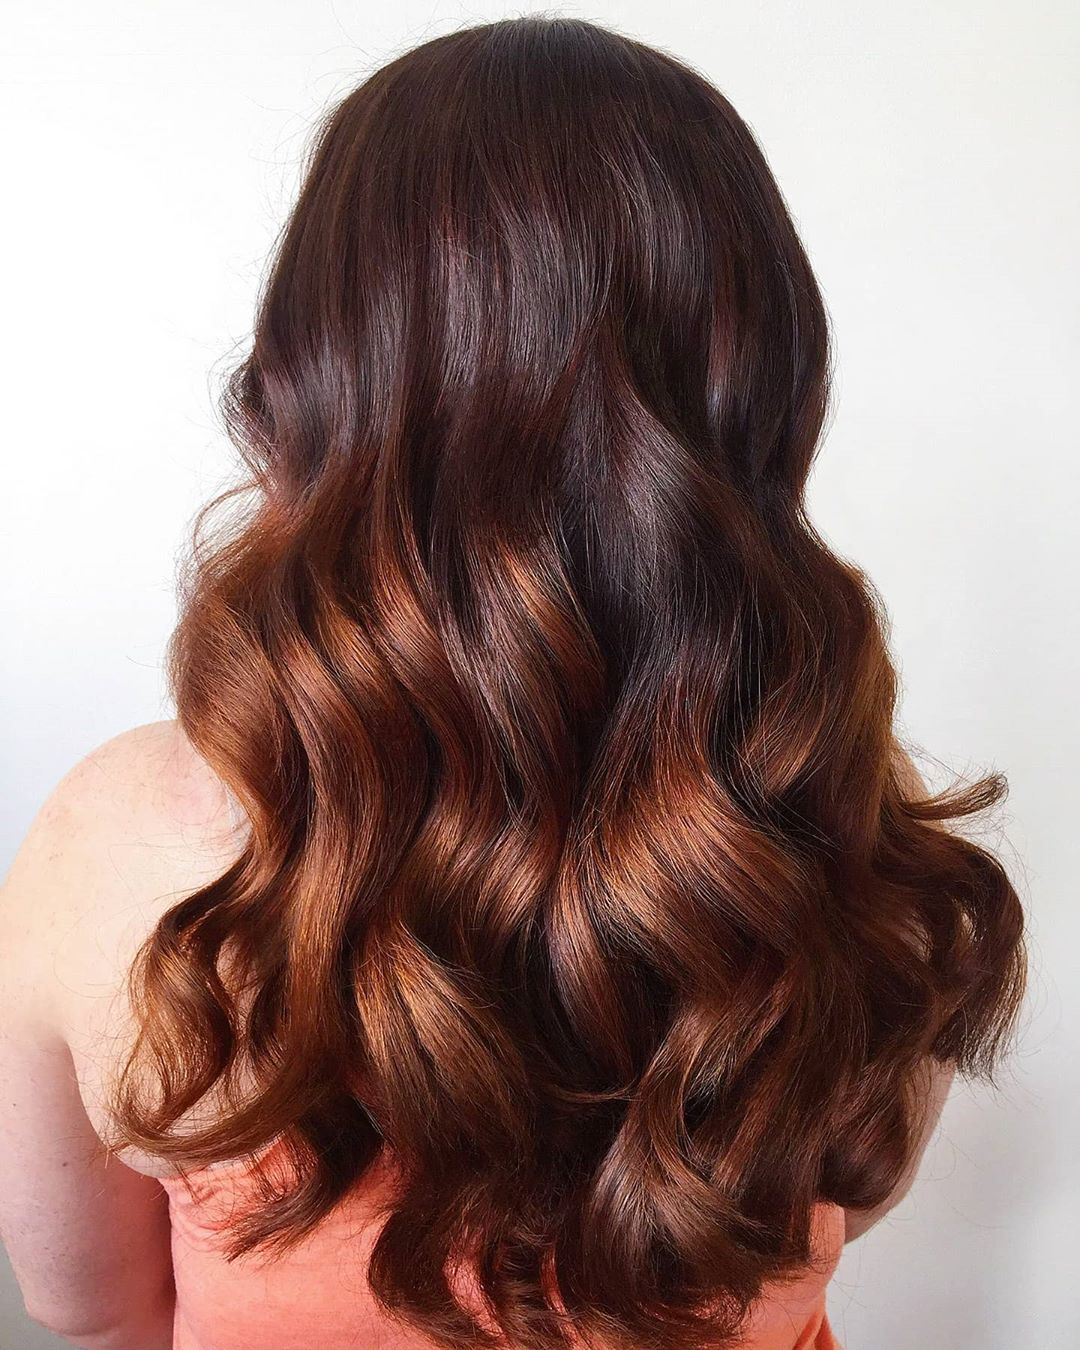 Dark hair color with caramel ombre